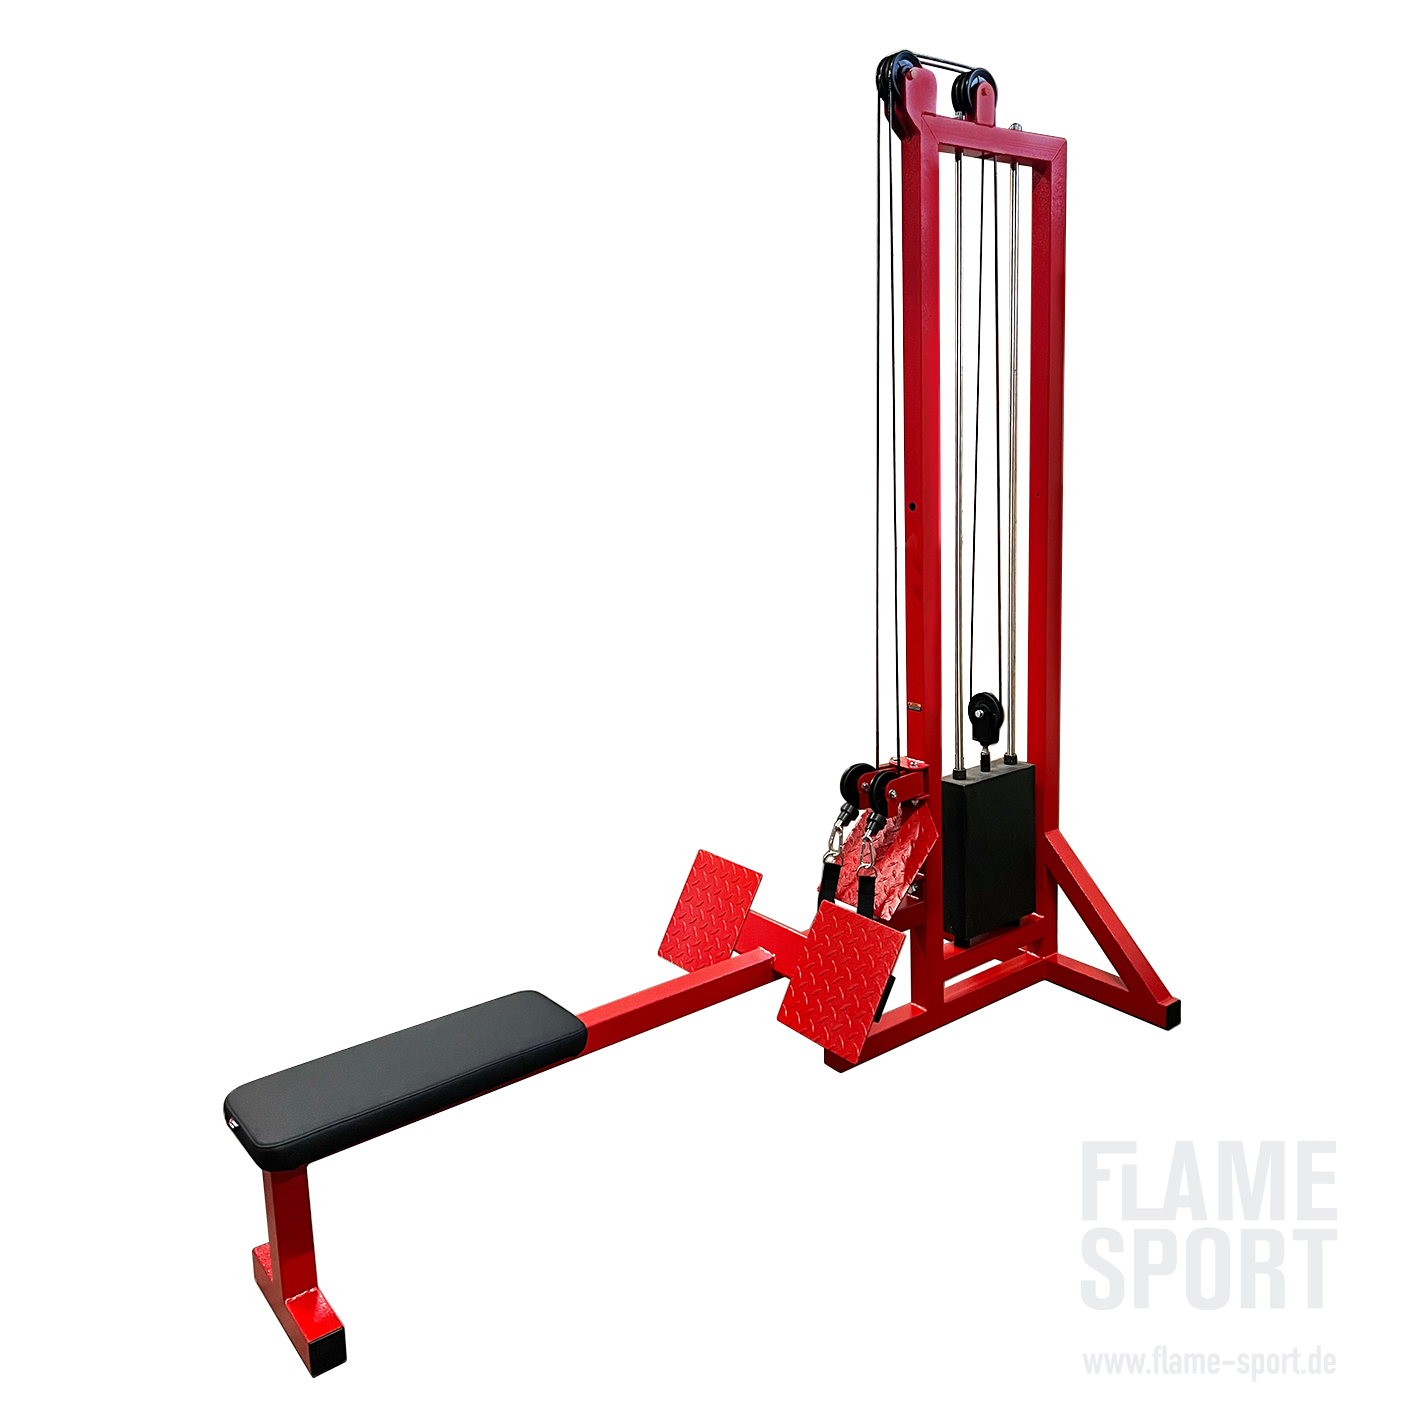 FLAME SPORT Seated Row Station (1M-2) DUAL